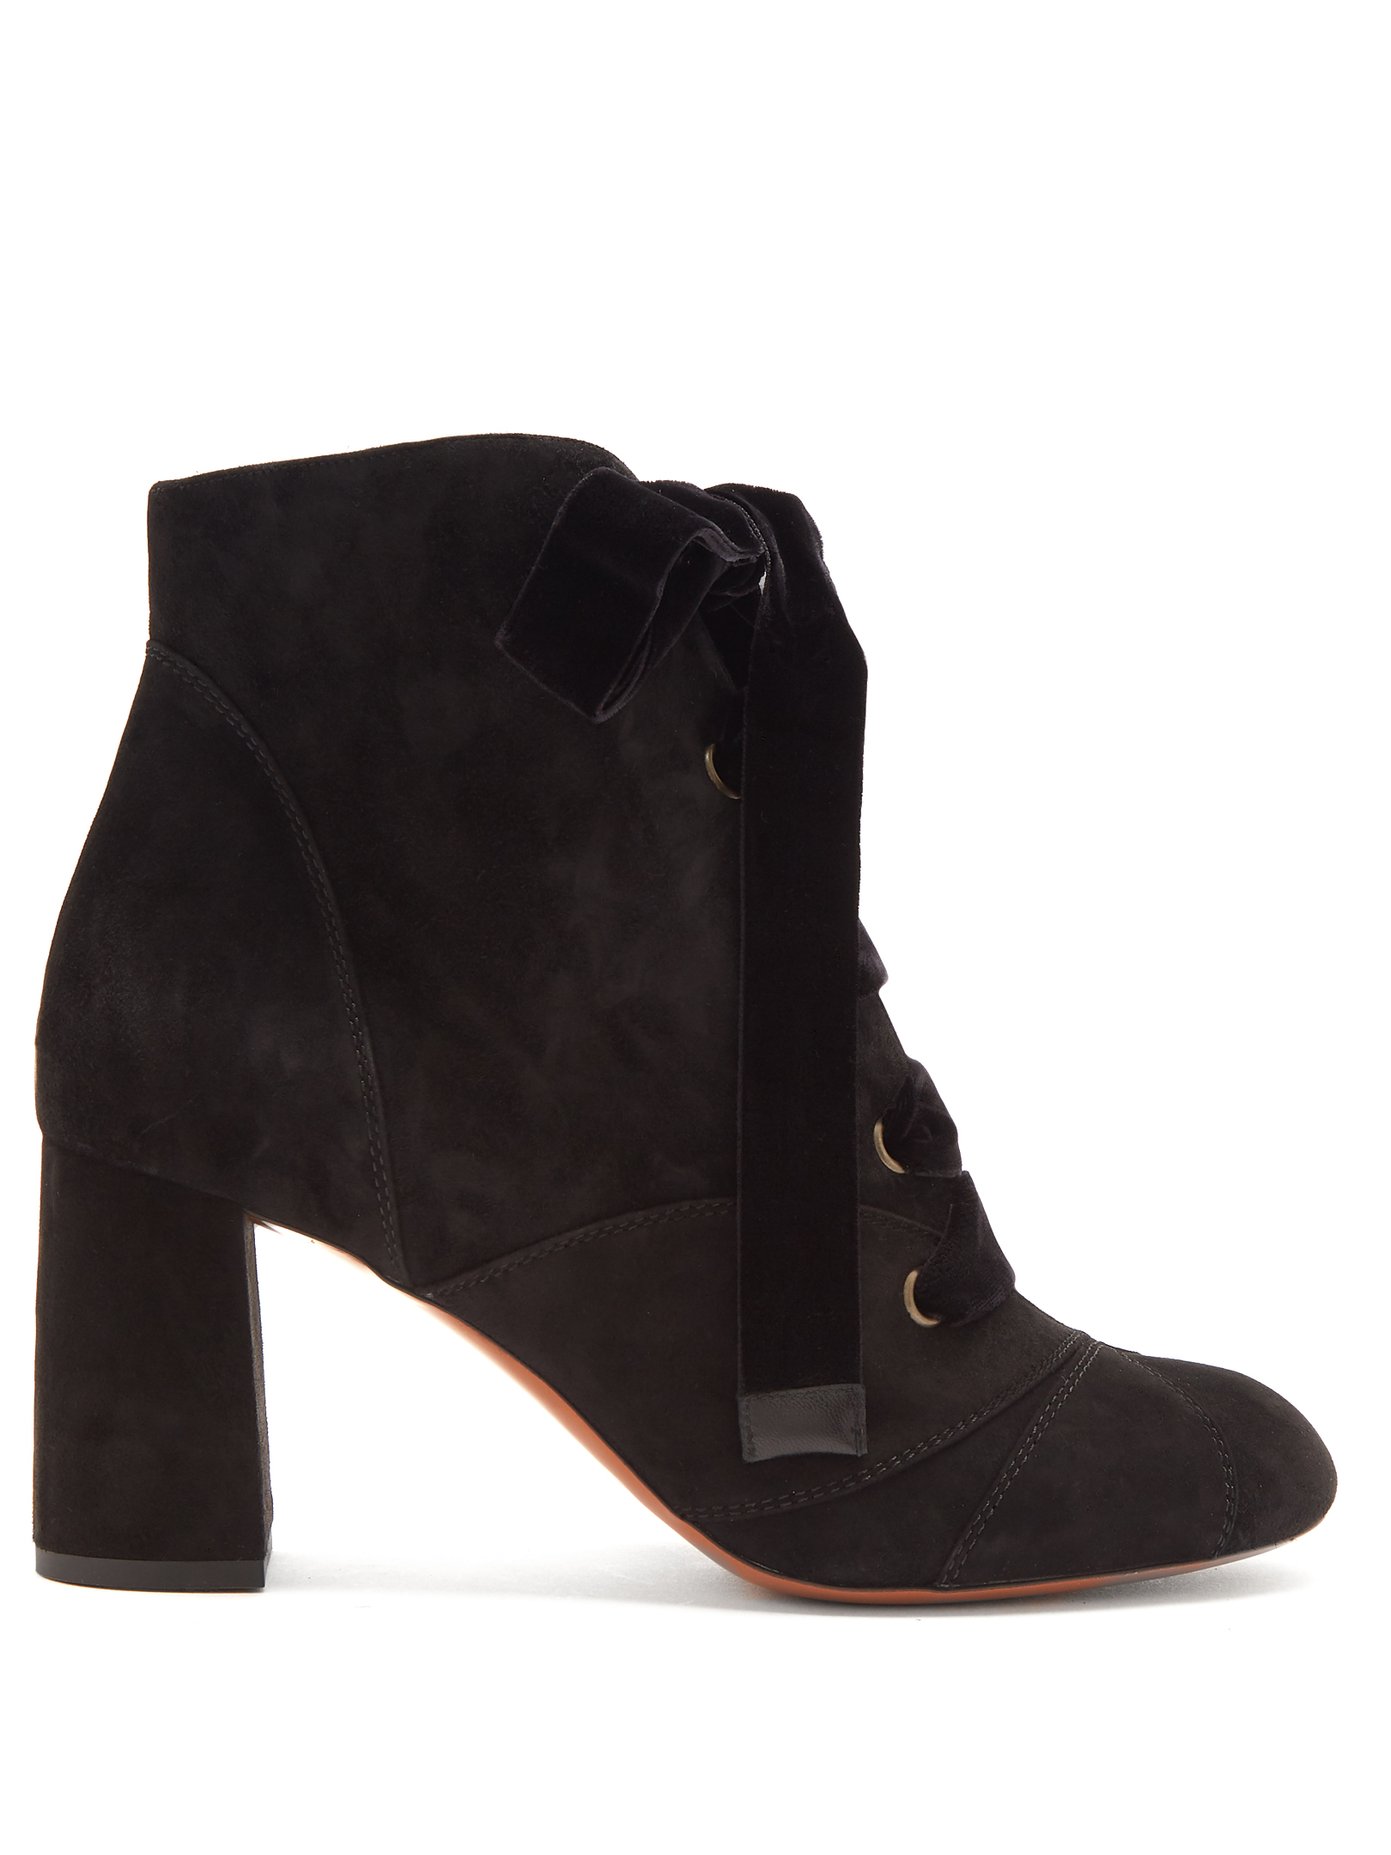 chloe lace up ankle boots